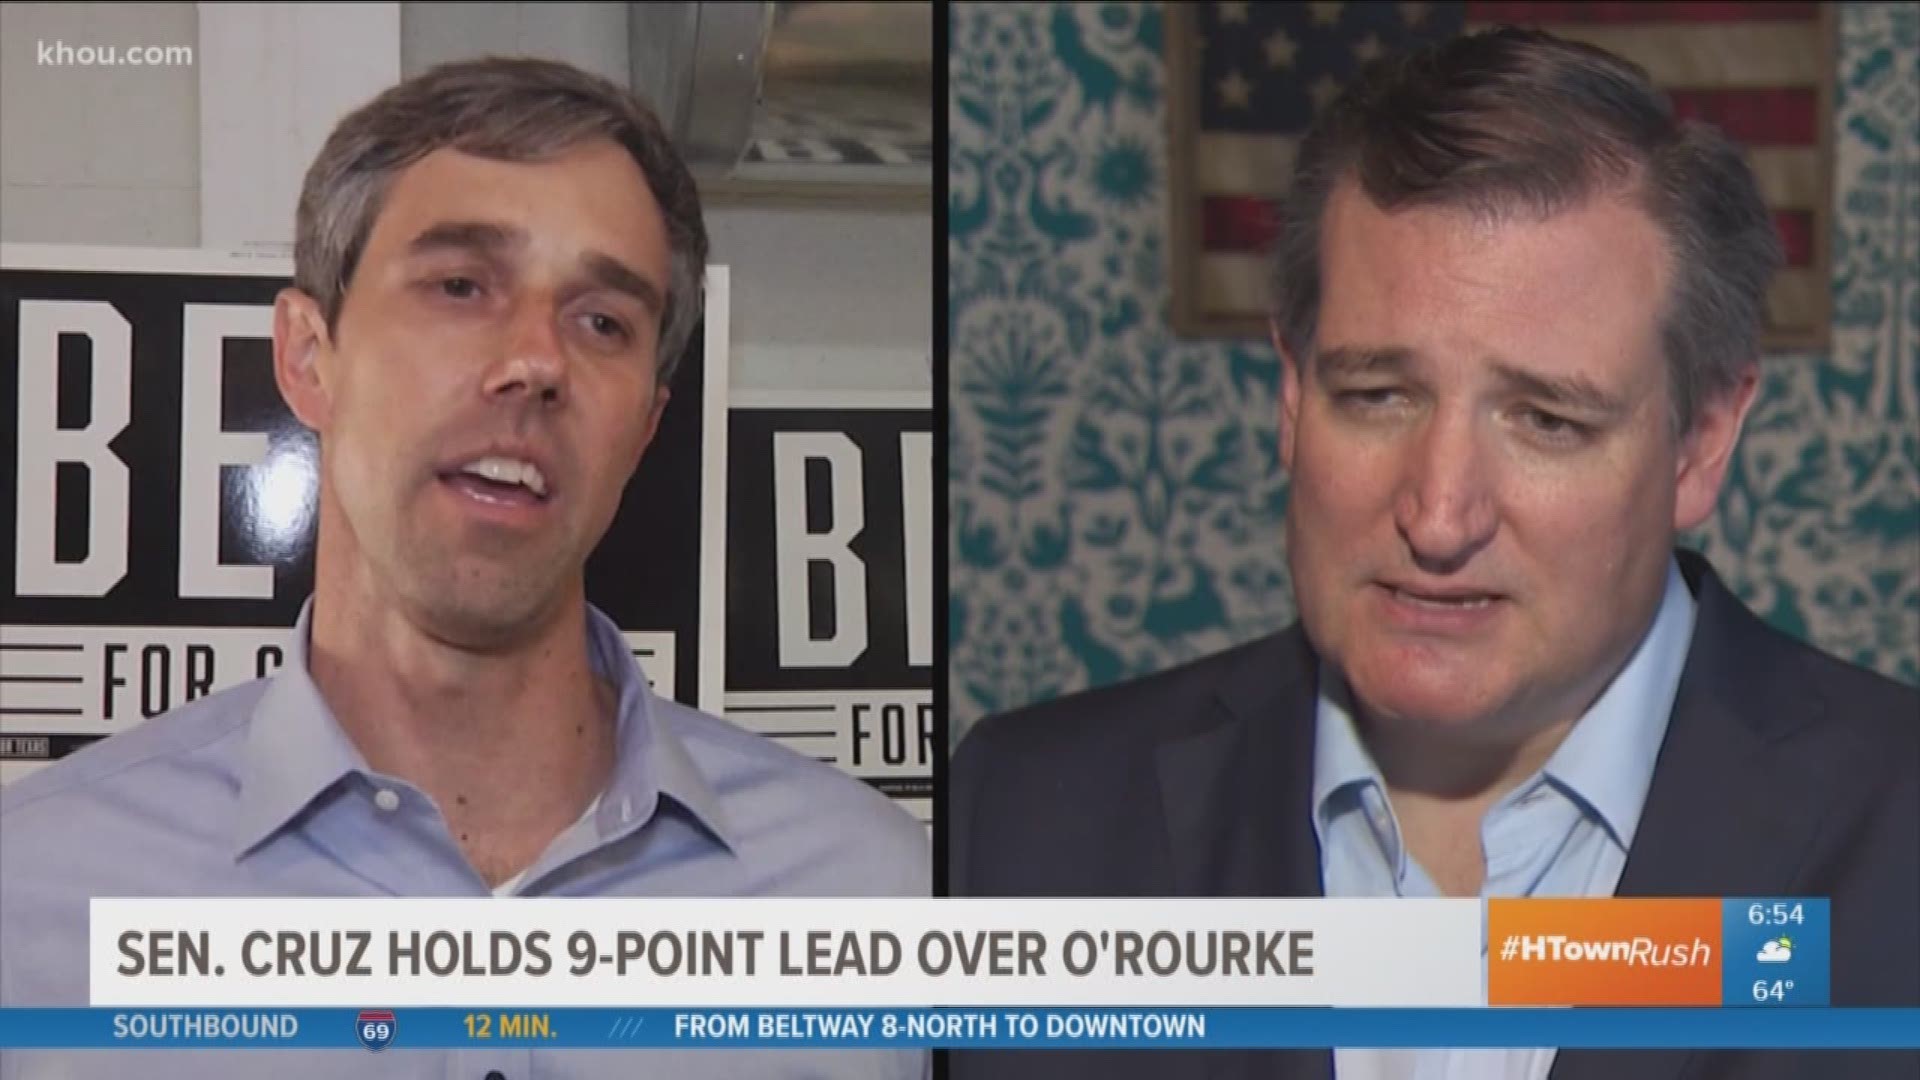 A new poll released Thursday morning showed Republican U.S. Sen. Ted Cruz has stabilized his lead over his Democrat challenger, U.S. Rep. Beto O'Rourke of El Paso.